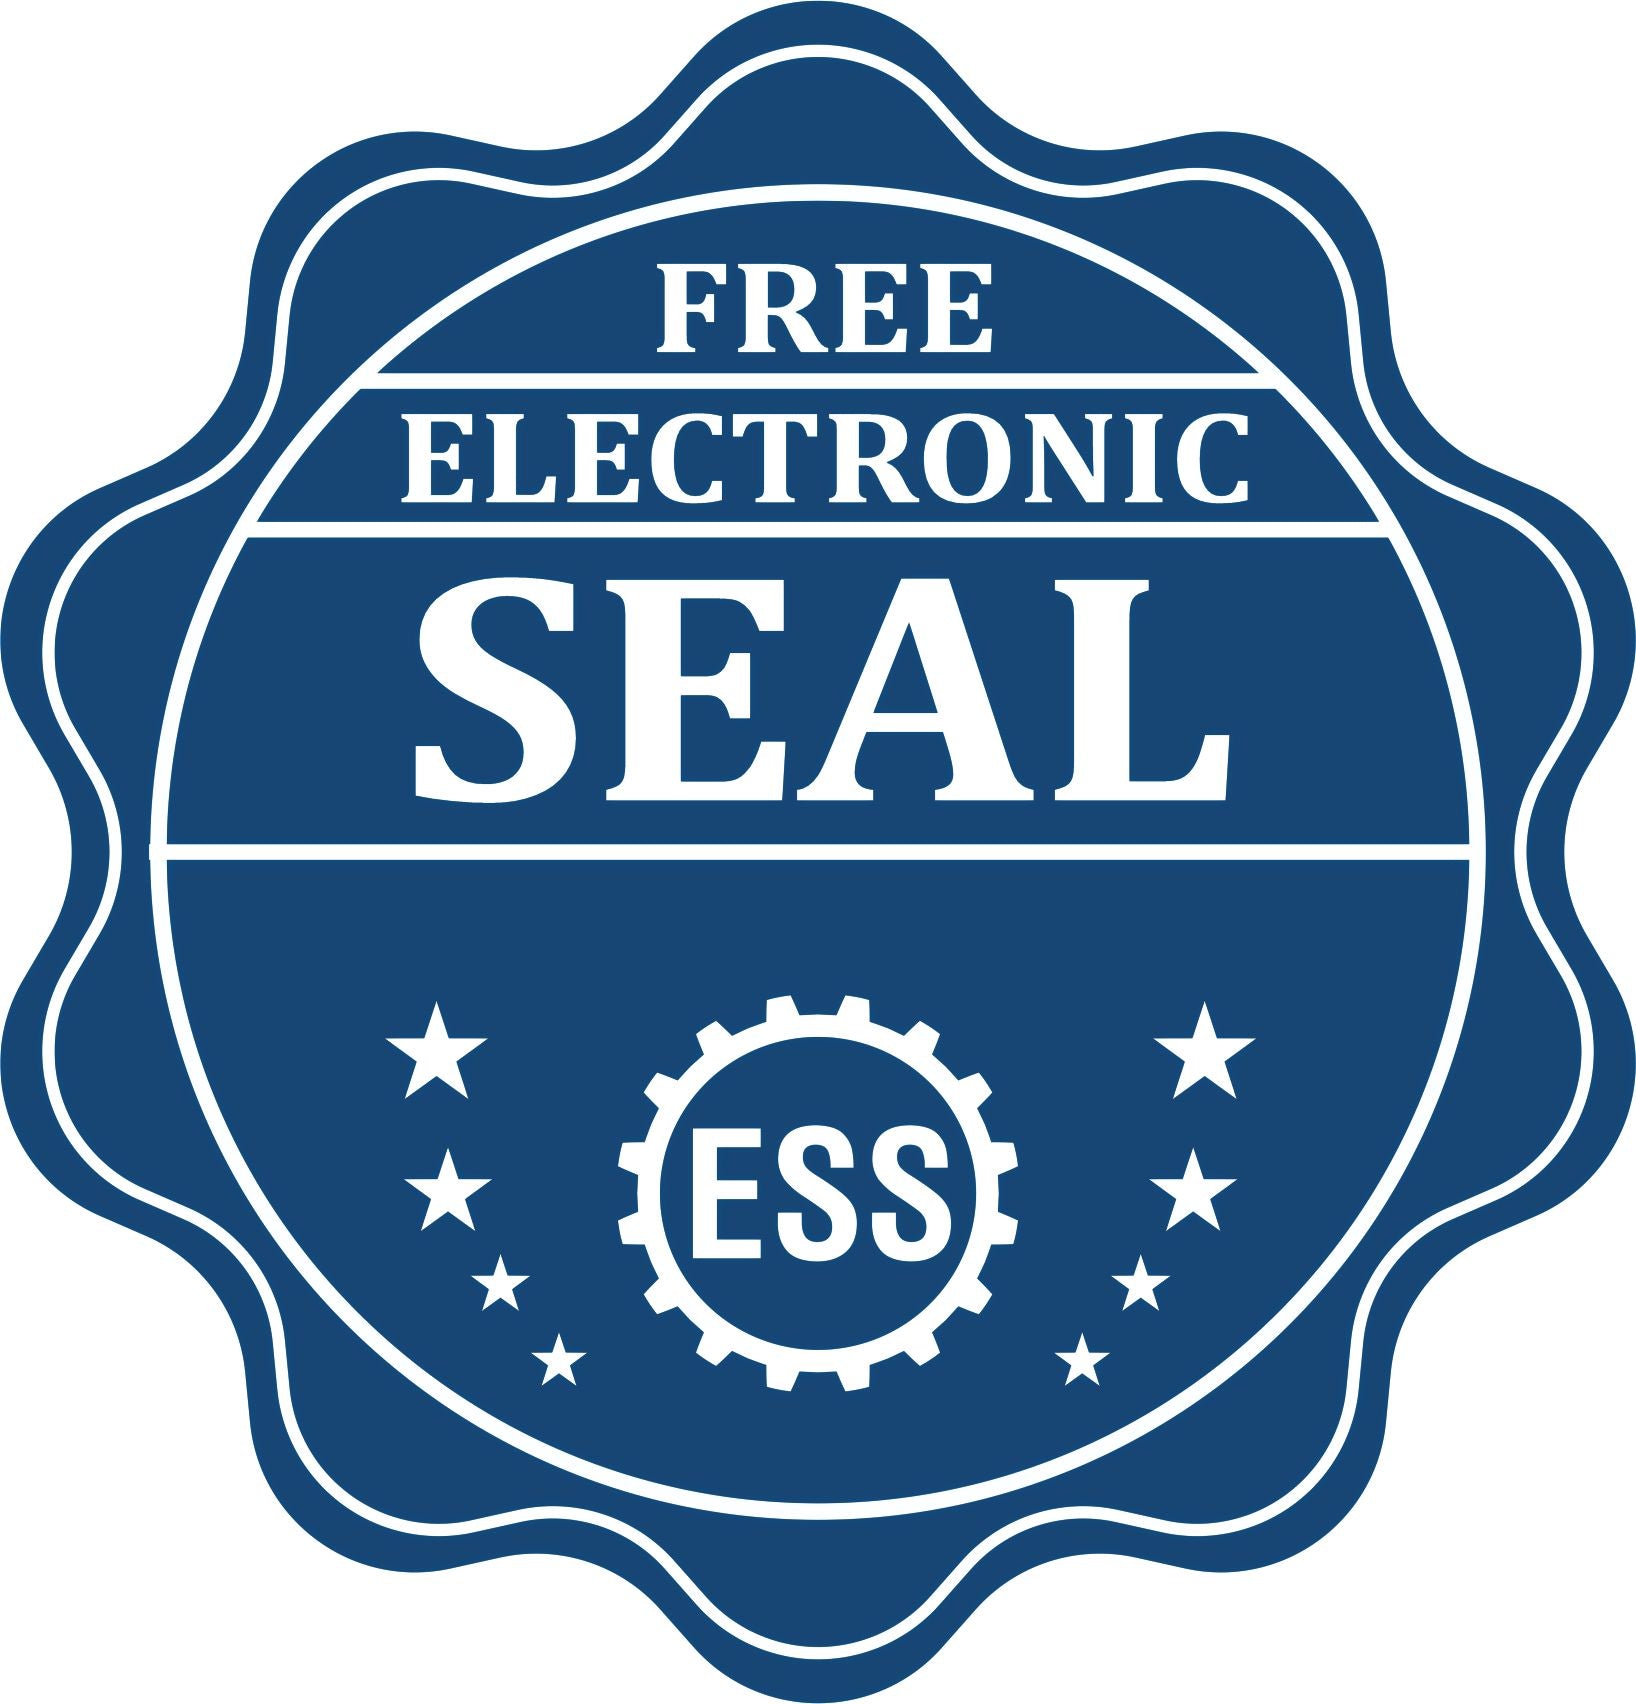 A badge showing a free electronic seal for the State of Arkansas Long Reach Architectural Embossing Seal with stars and the ESS gear on the emblem.